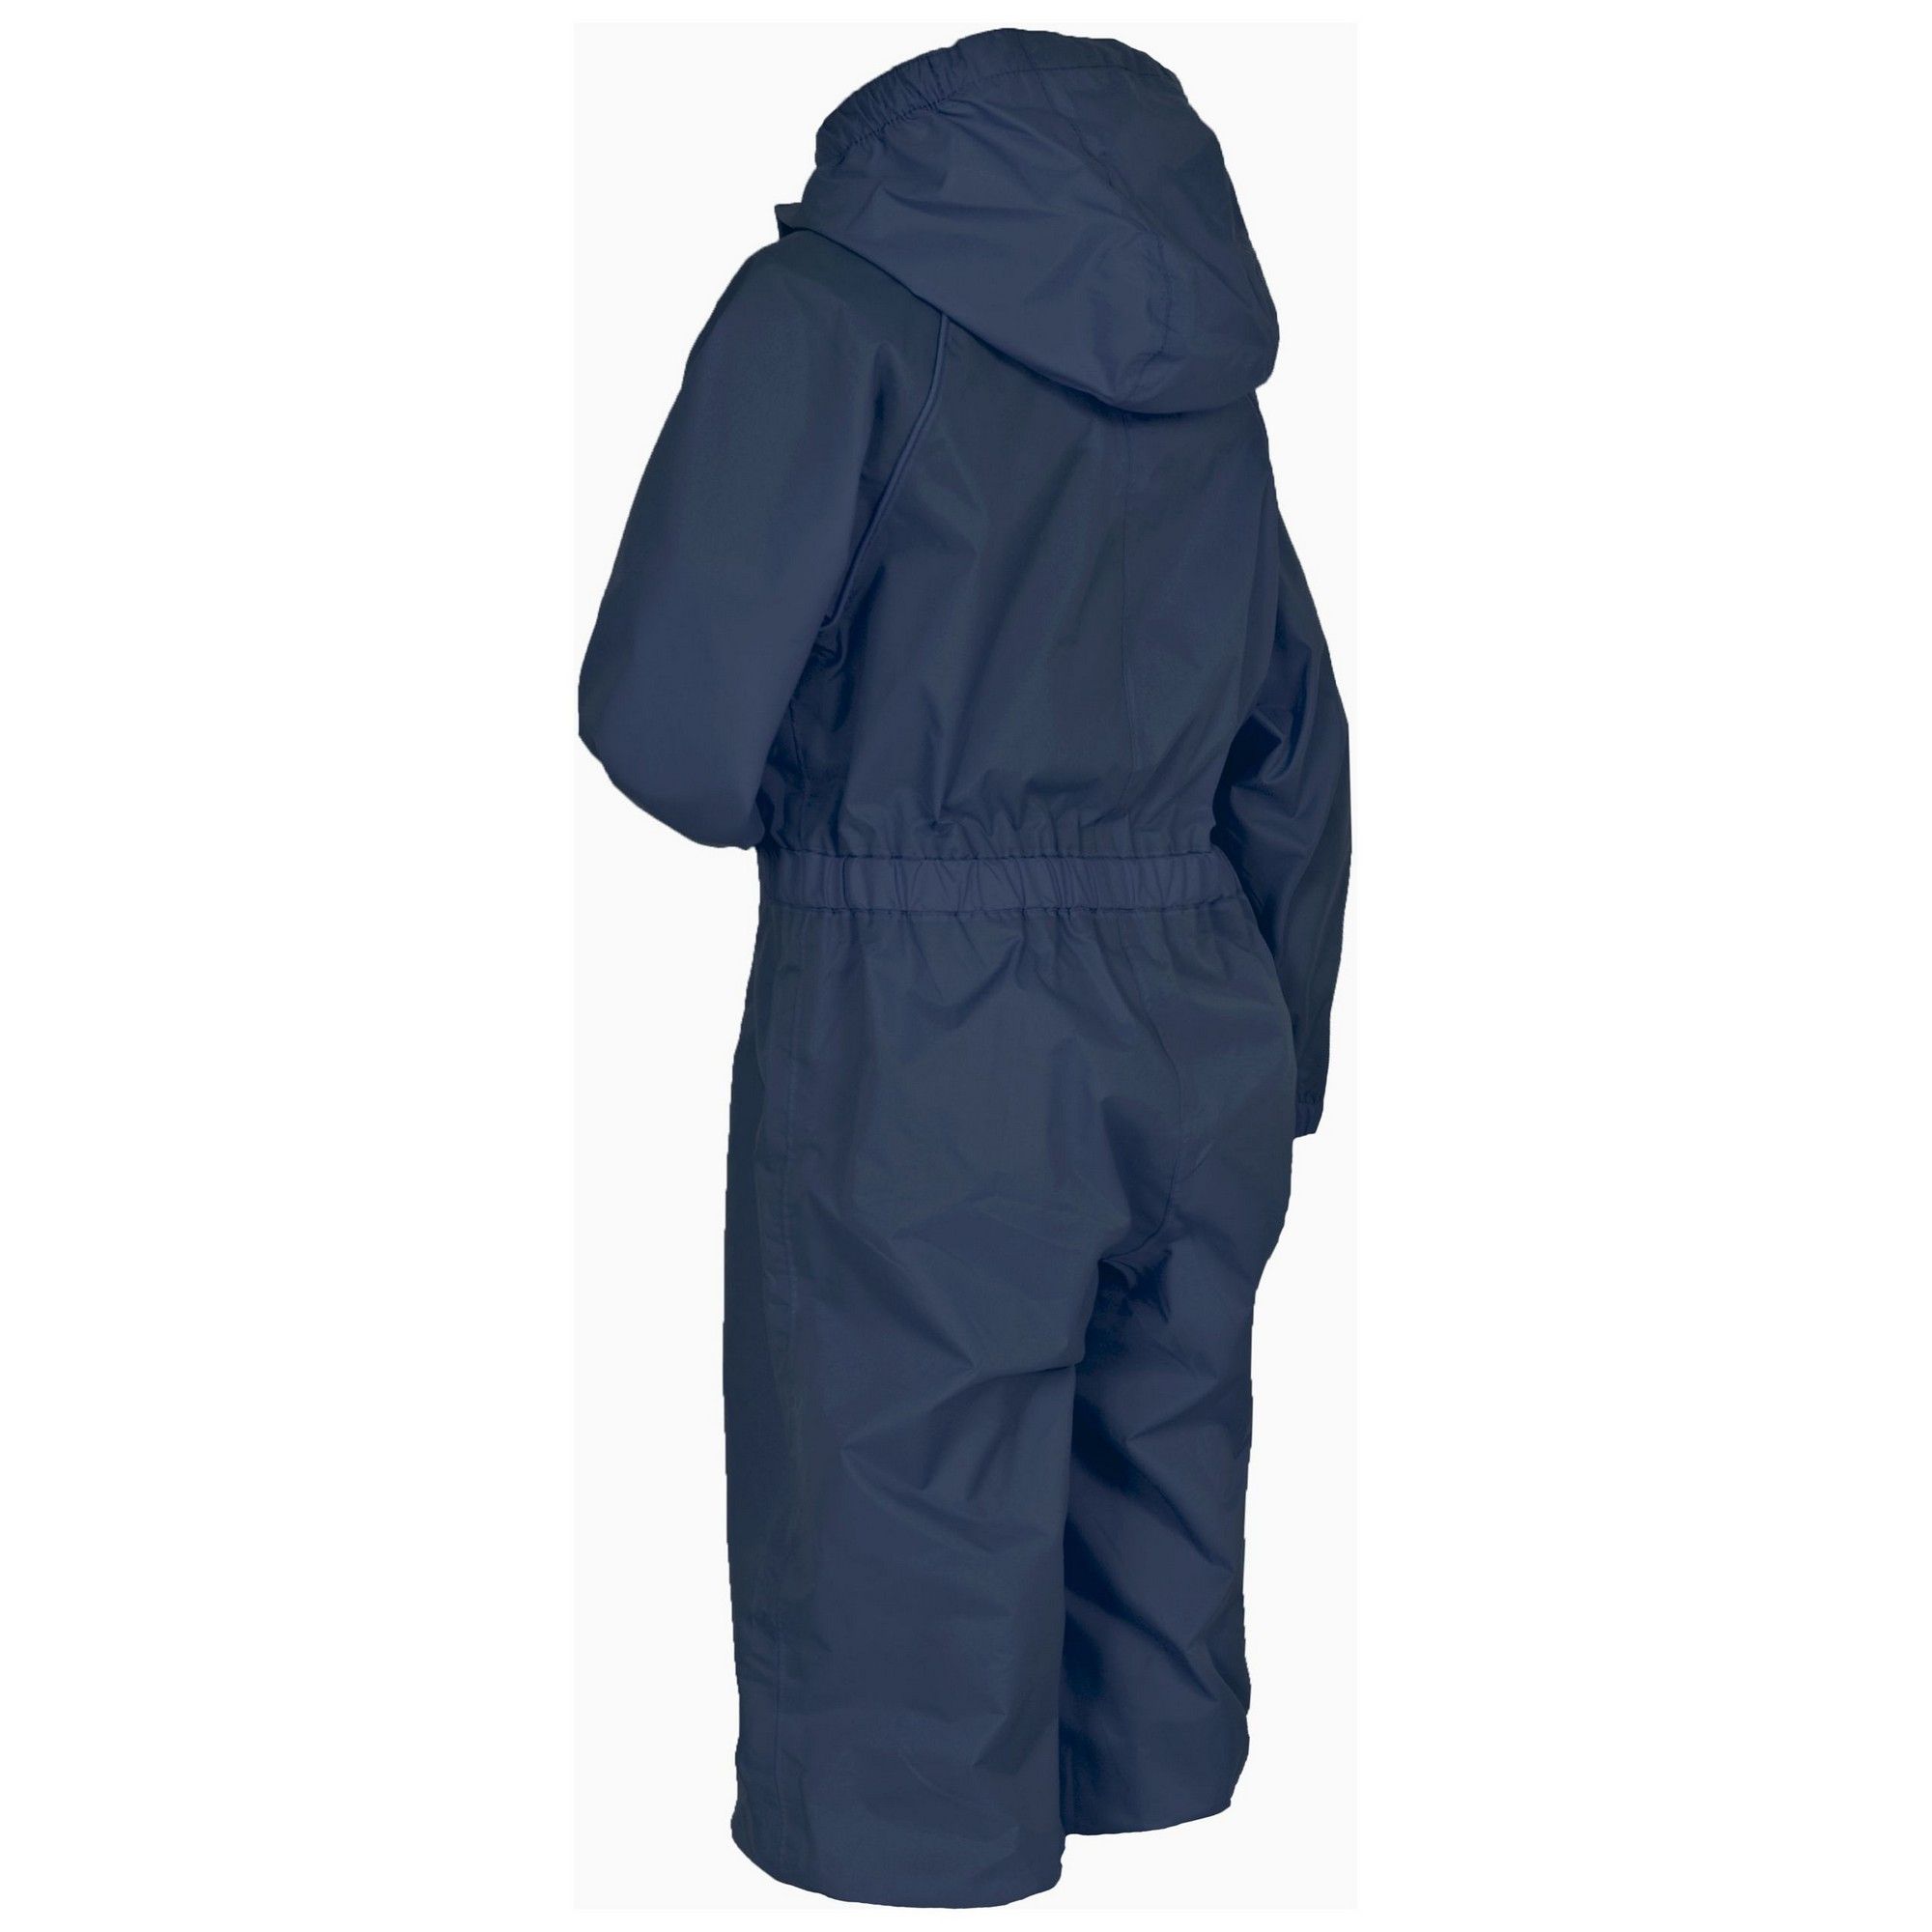 Material: 100% PU coated polyamide PU. Unisex shell kids rain suit. Grown on hood. Full body length front zip. Elasticated side waist. Elasticated cuff and ankles.